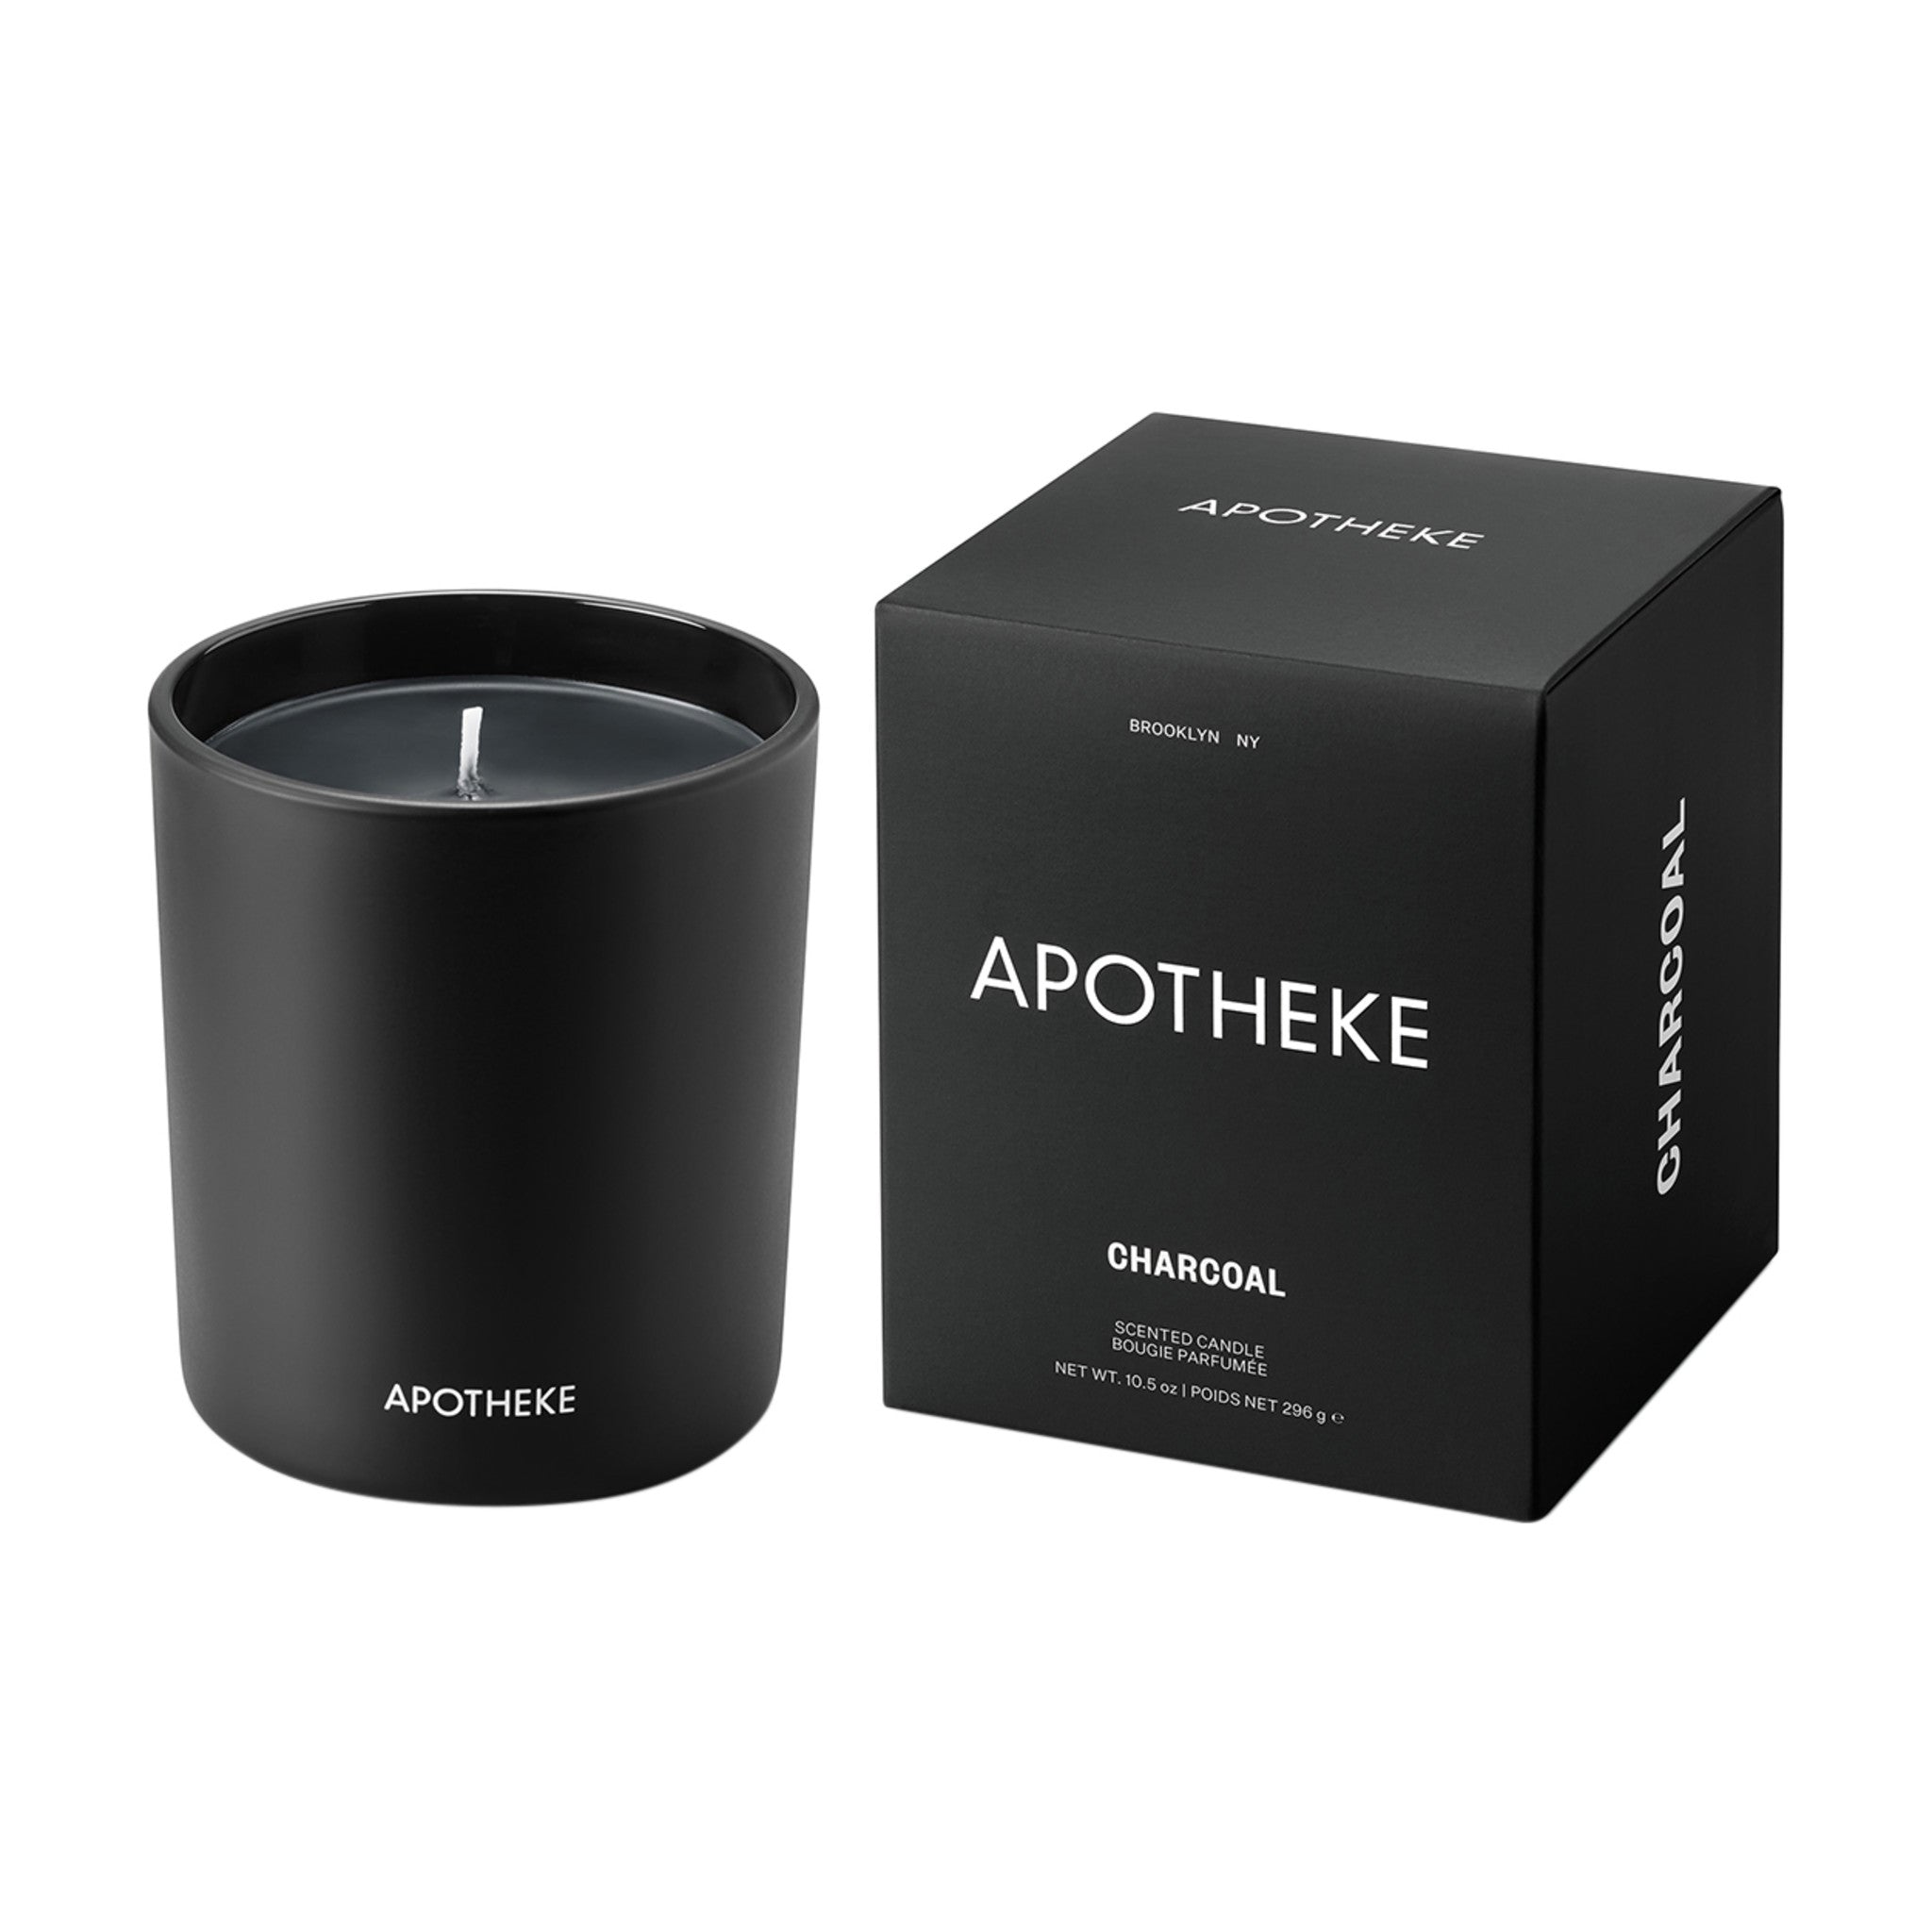 Apotheke Charcoal Classic Scented Candle main image.